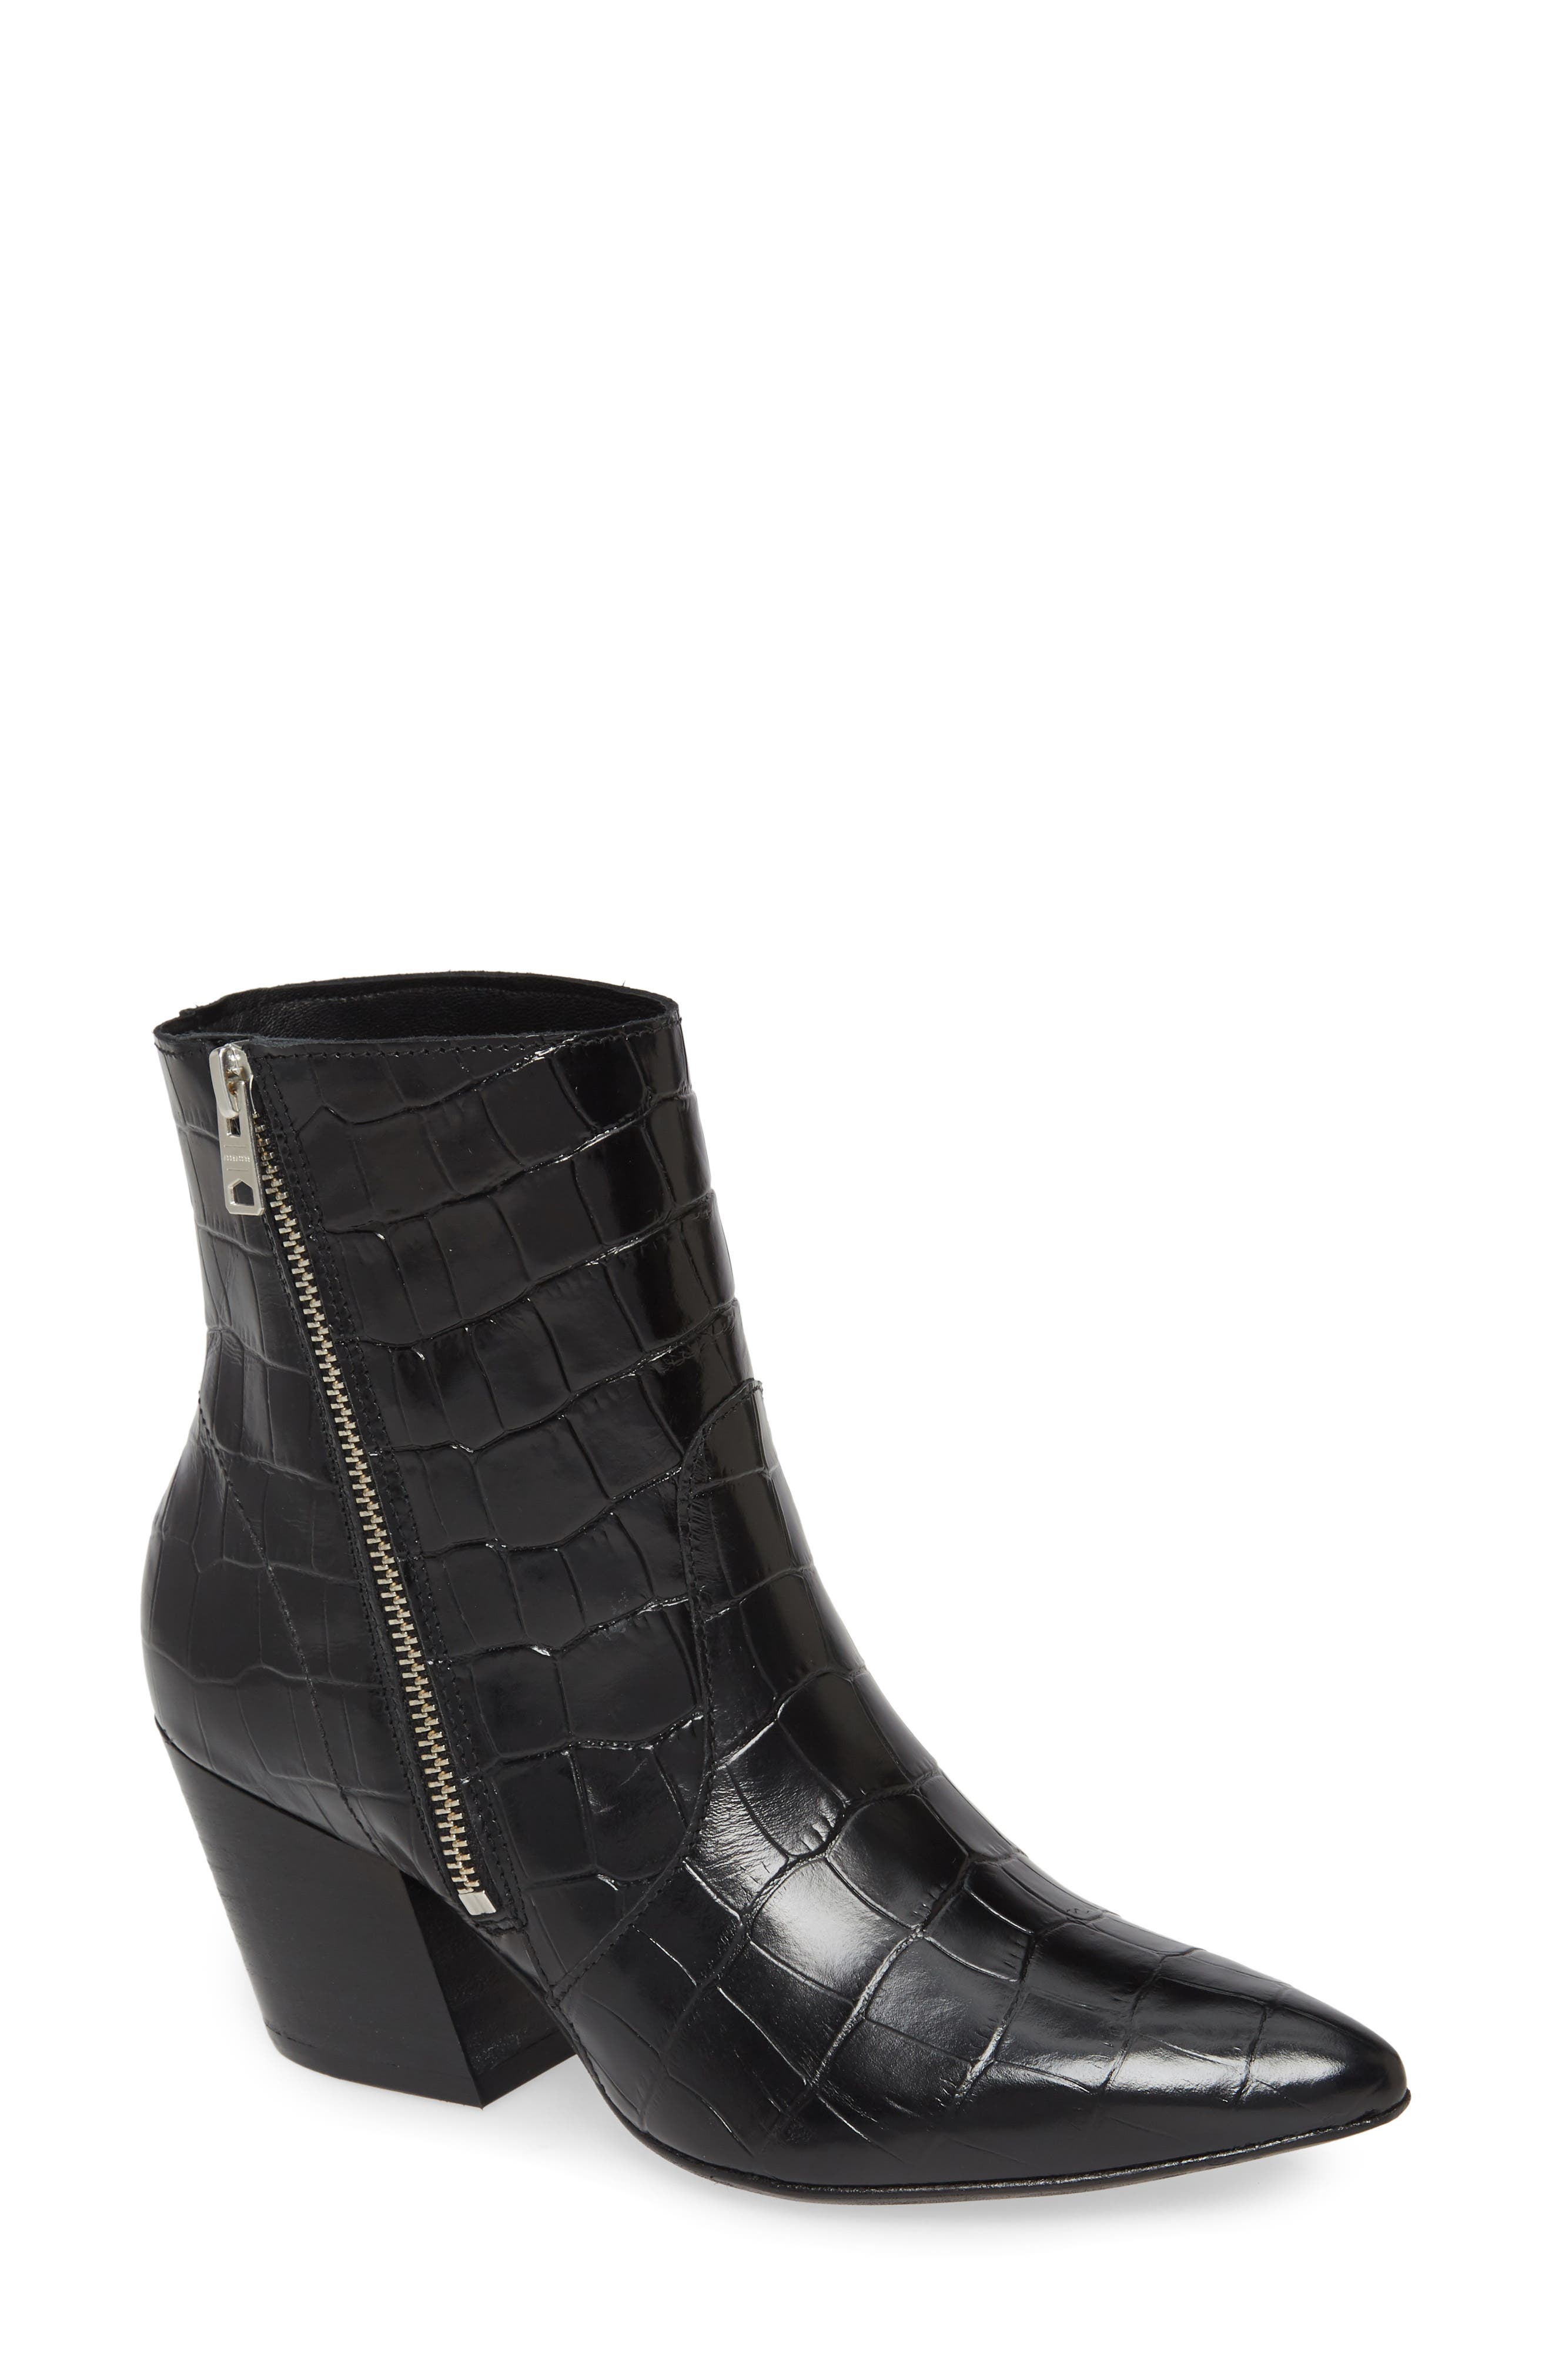 all saints aster boot